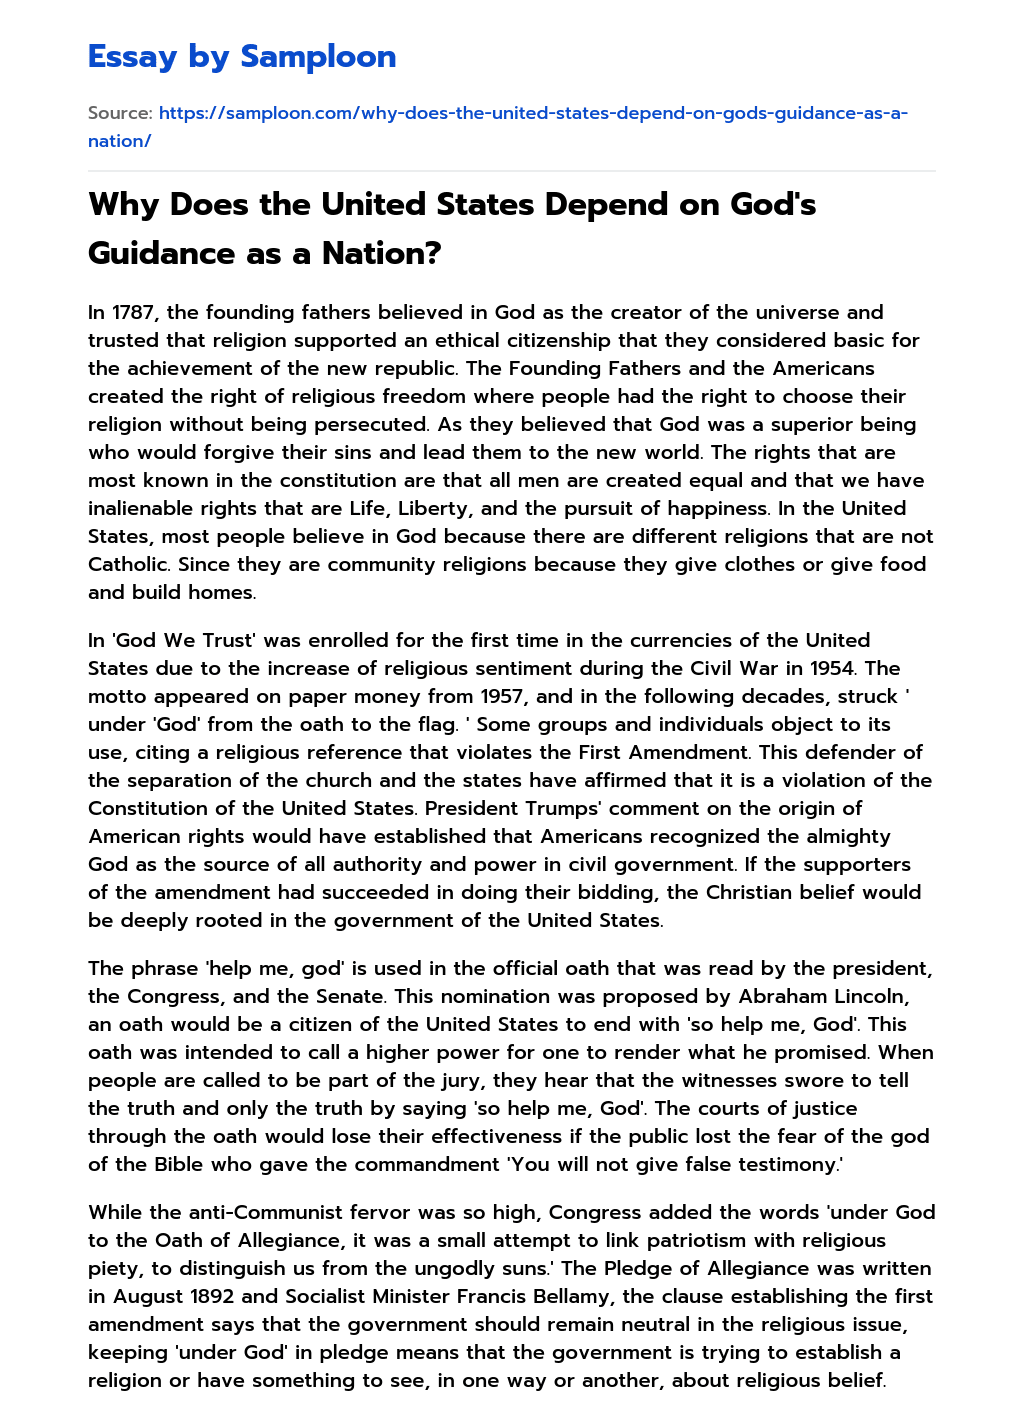 Why Does the United States Depend on God’s Guidance as a Nation? essay